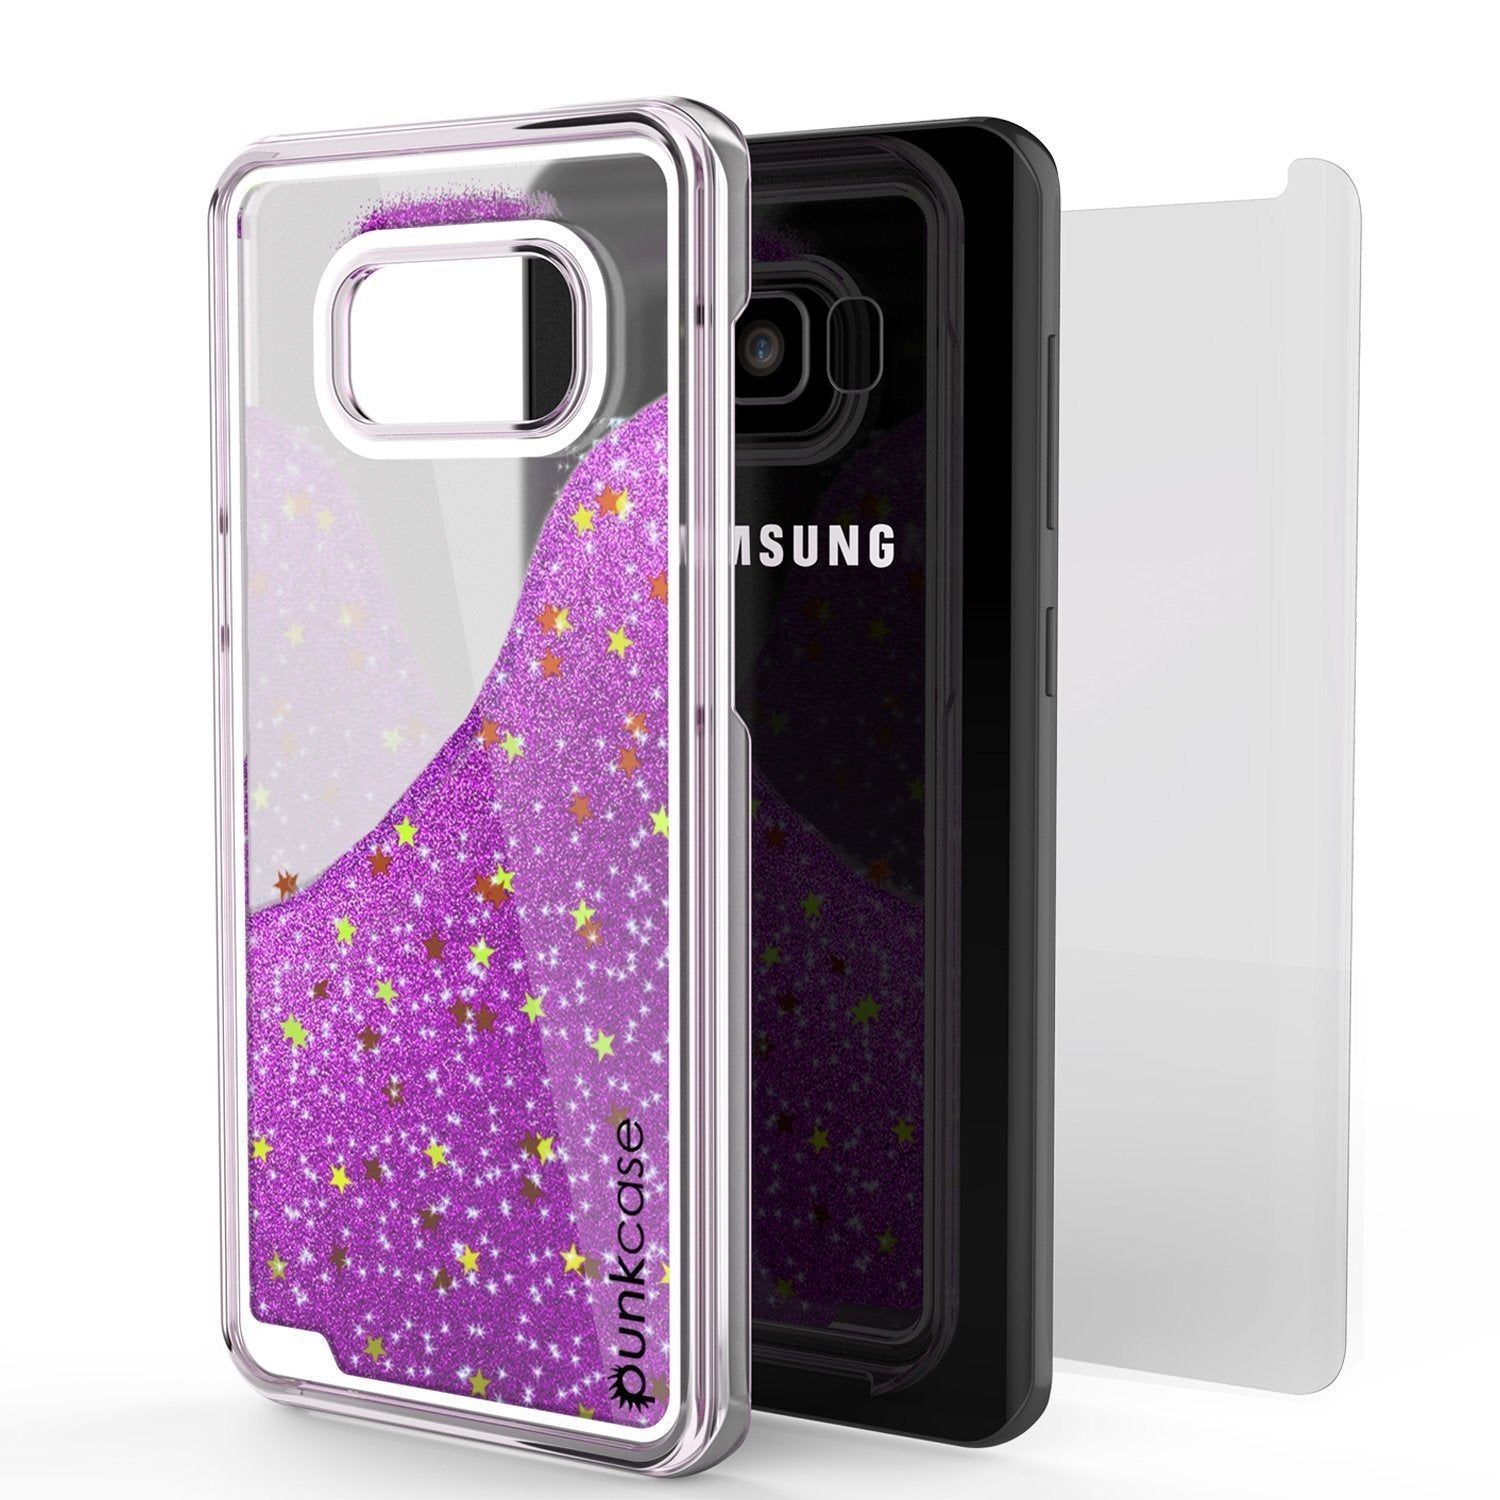 S8 Plus Case, Punkcase Liquid Purple Series, Protective Dual Layer Floating Glitter Cover